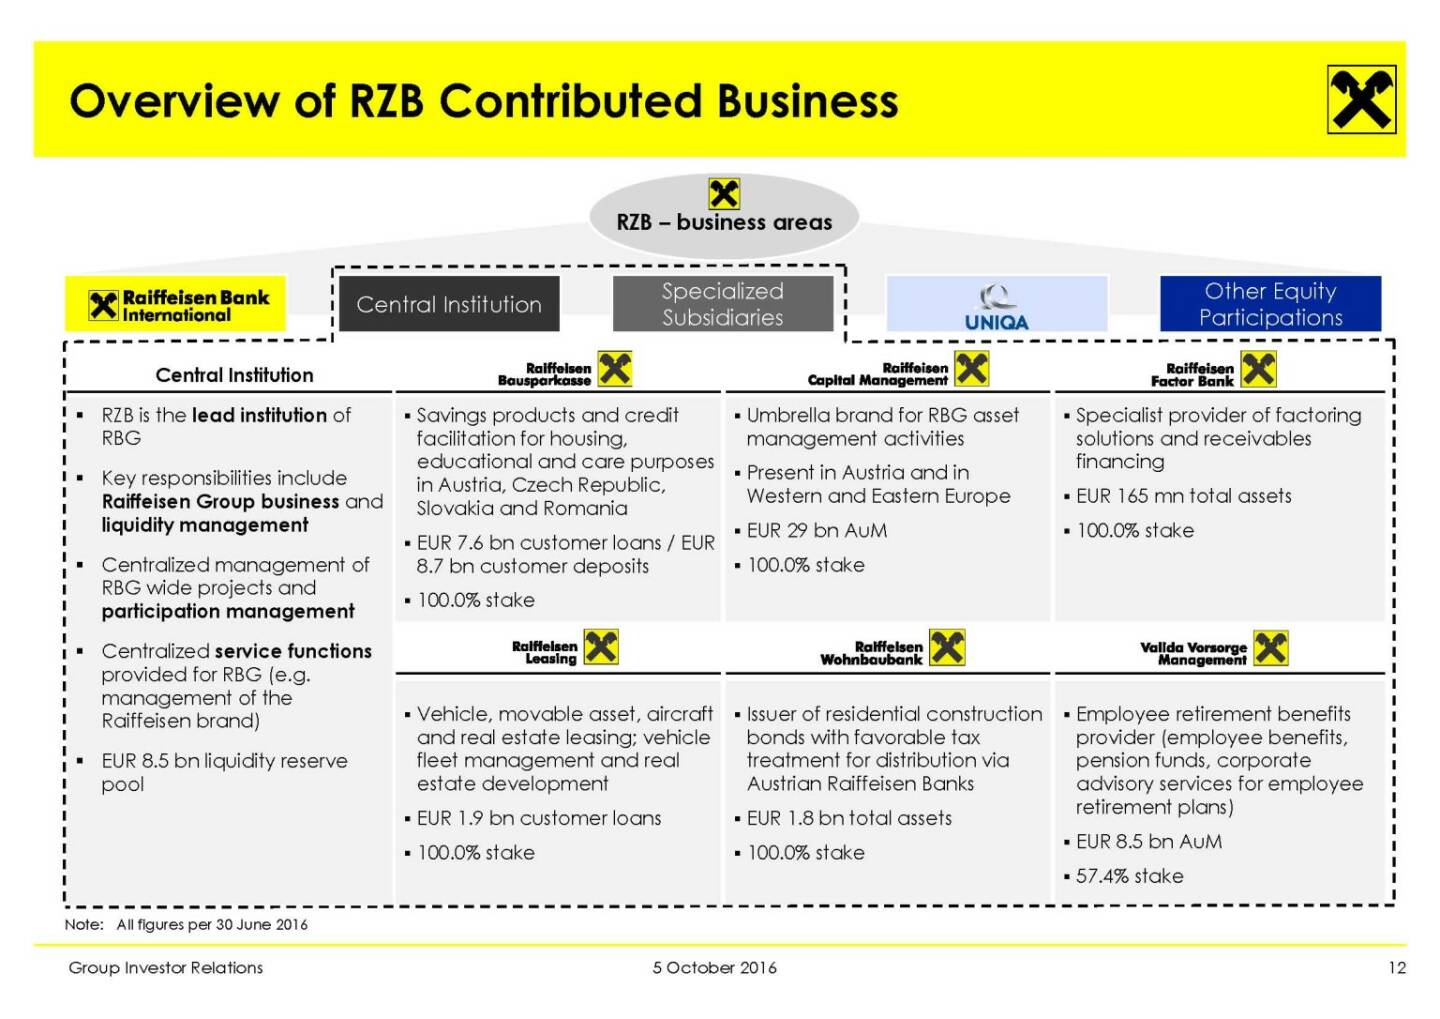 RBI - Overview of RZB Contributed Business